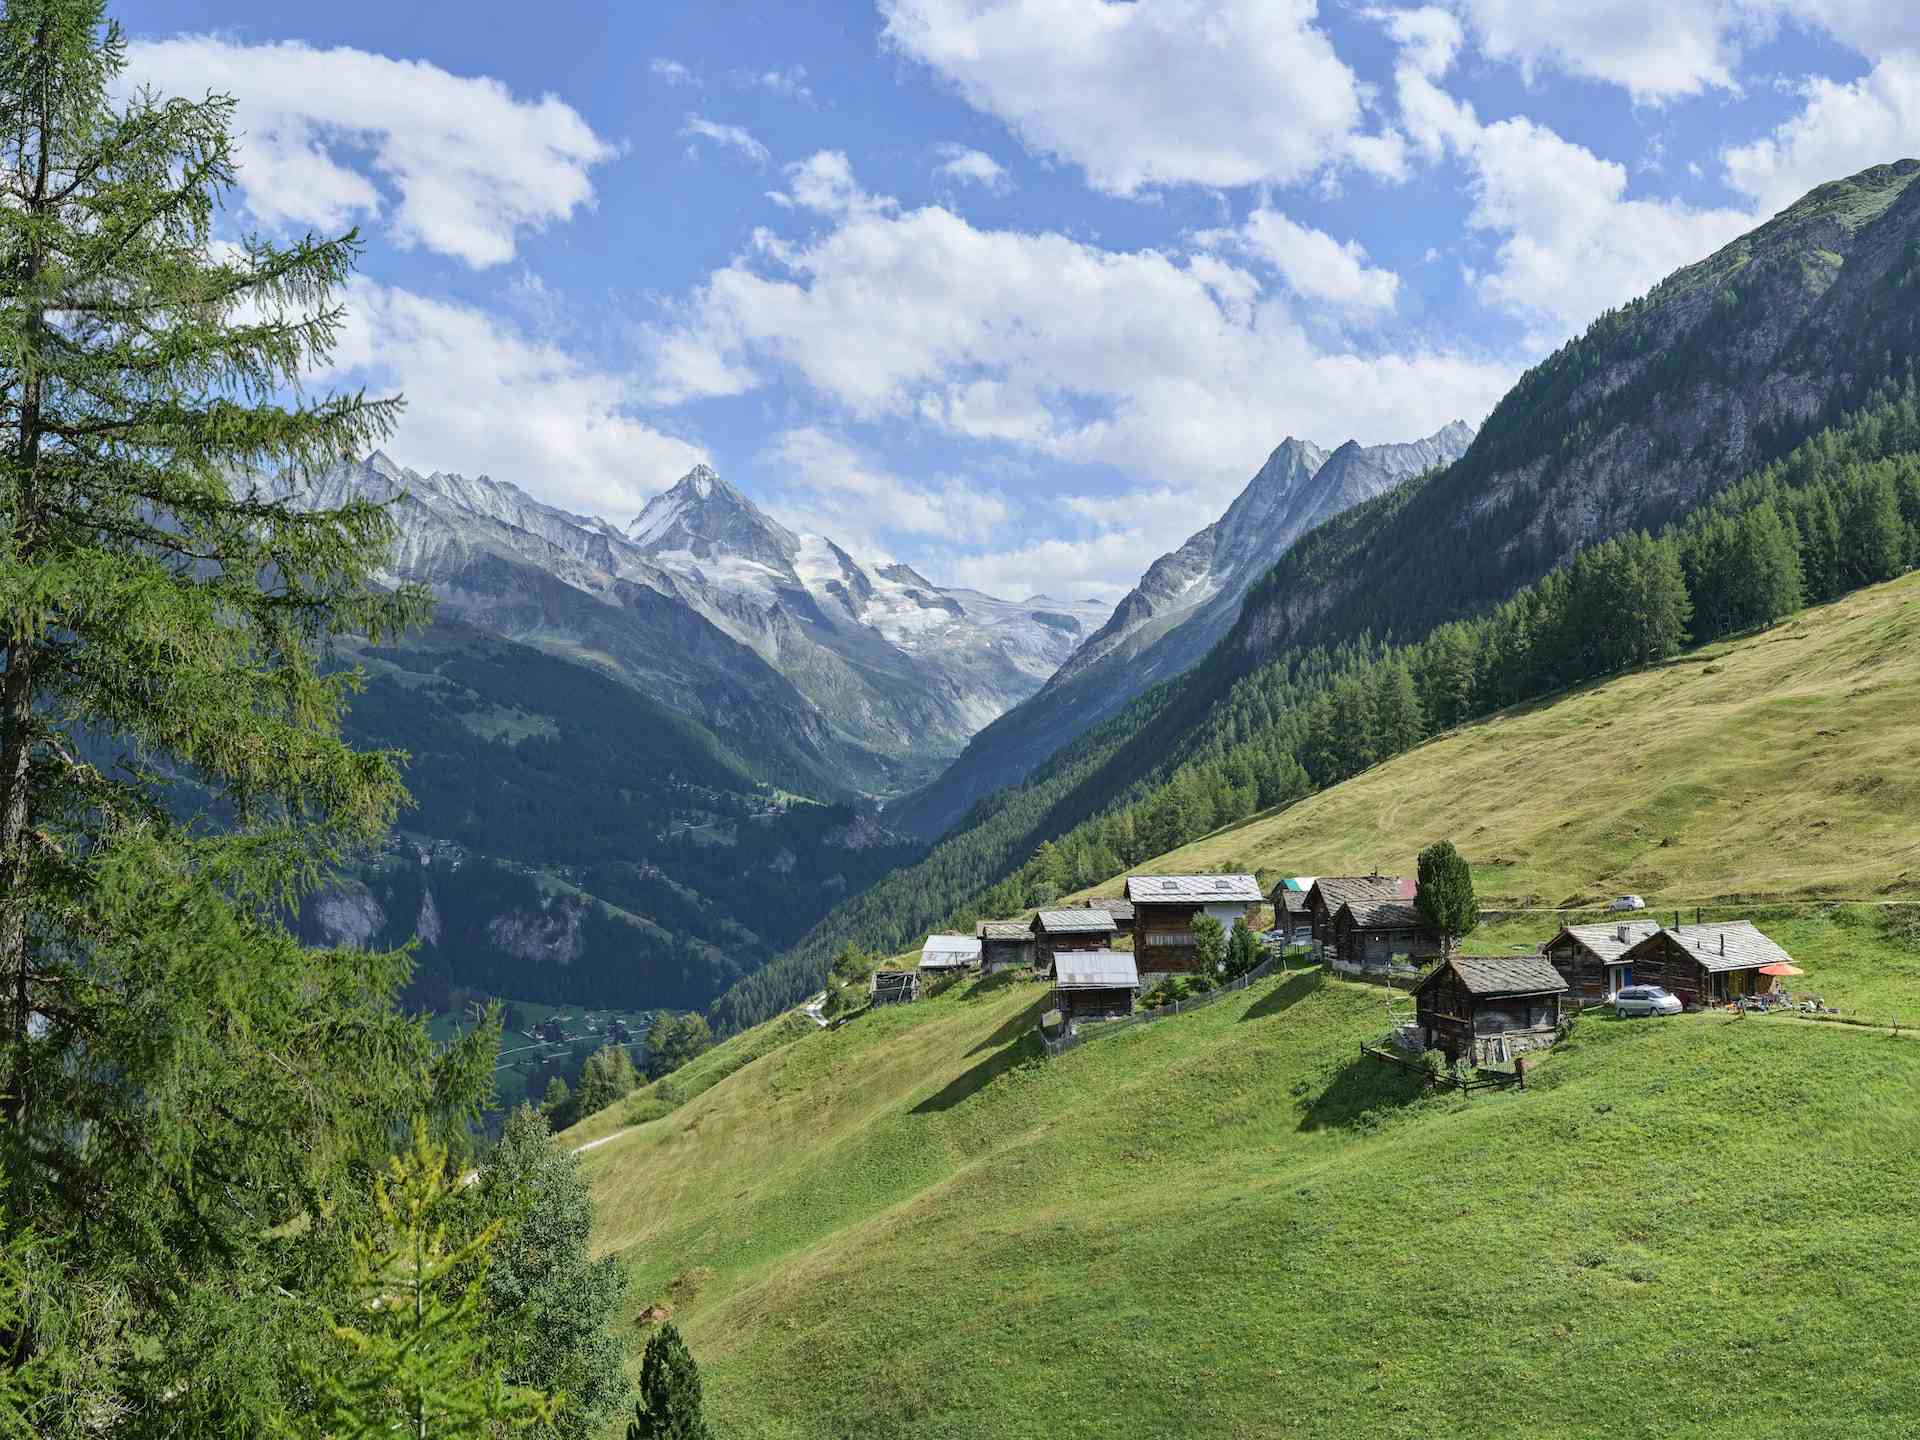 Baie-Attitude, producer in Ravoire canton of Valais in Switzerland